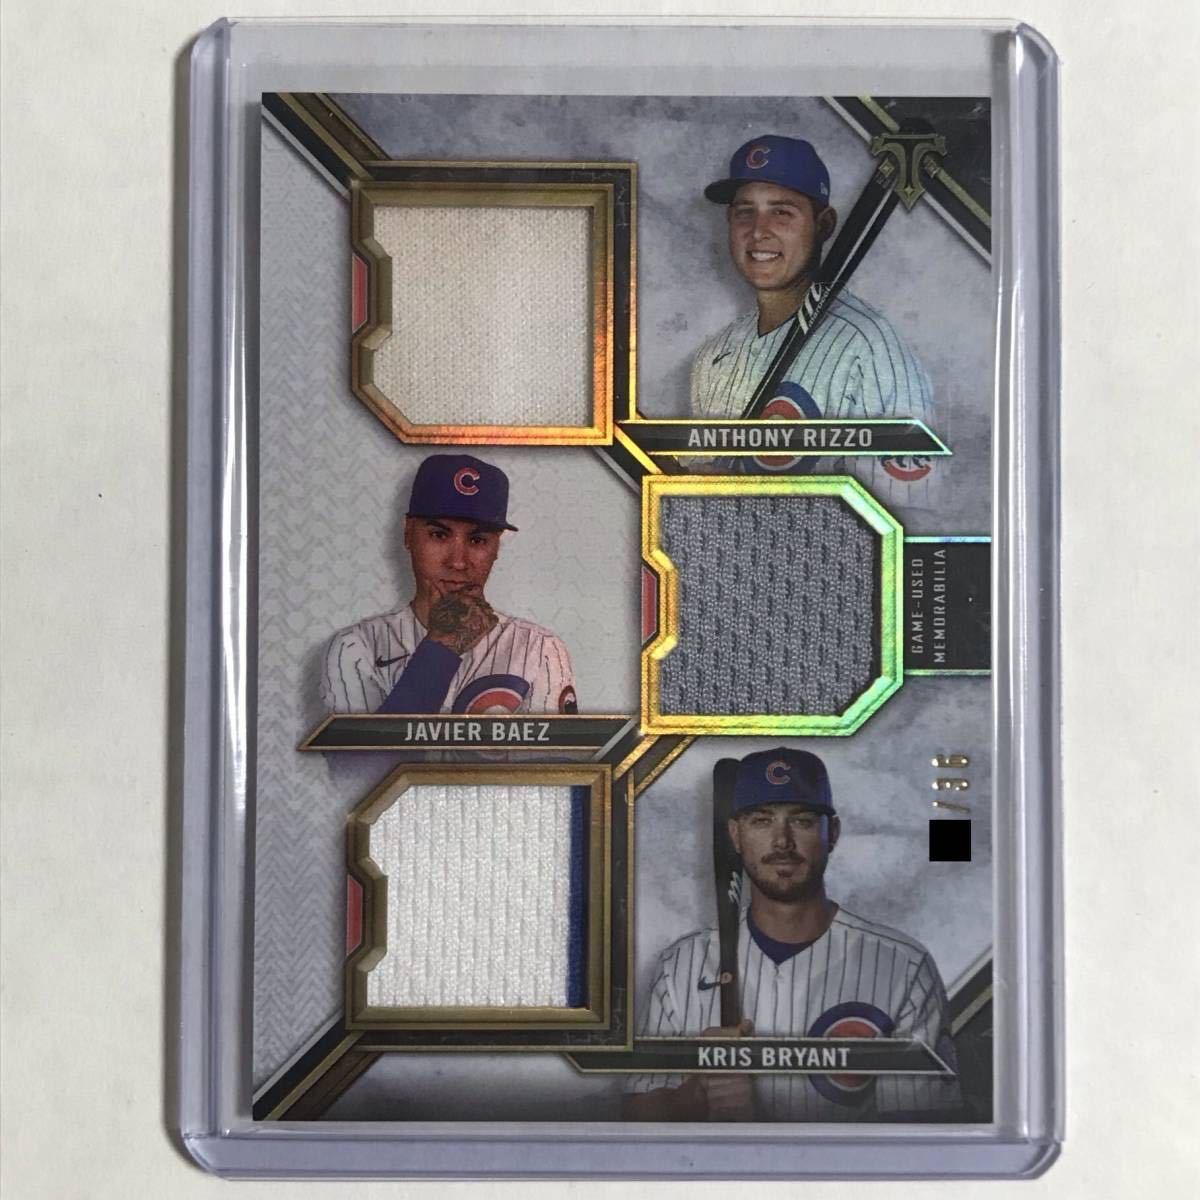 Dirty！[Anthony Rizzo][Kris Bryant][Javier Baez] Legends Relic Combo[2021 Topps Triple Threads Baseball Card]Chicago Cubs jersey